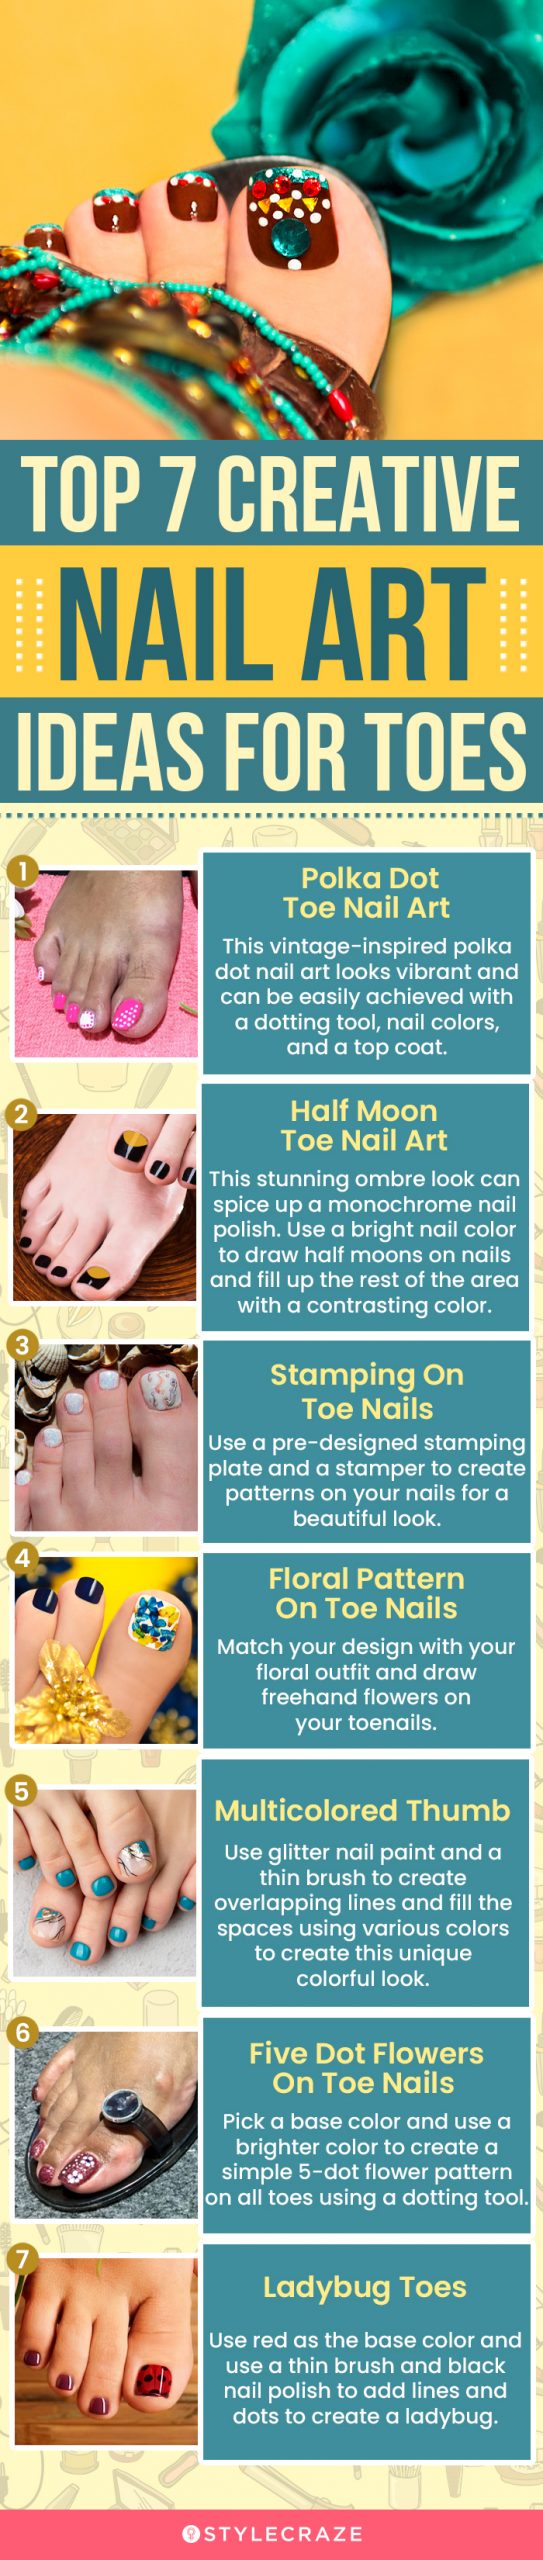 7 top creative nail ideas for toes (infographic)